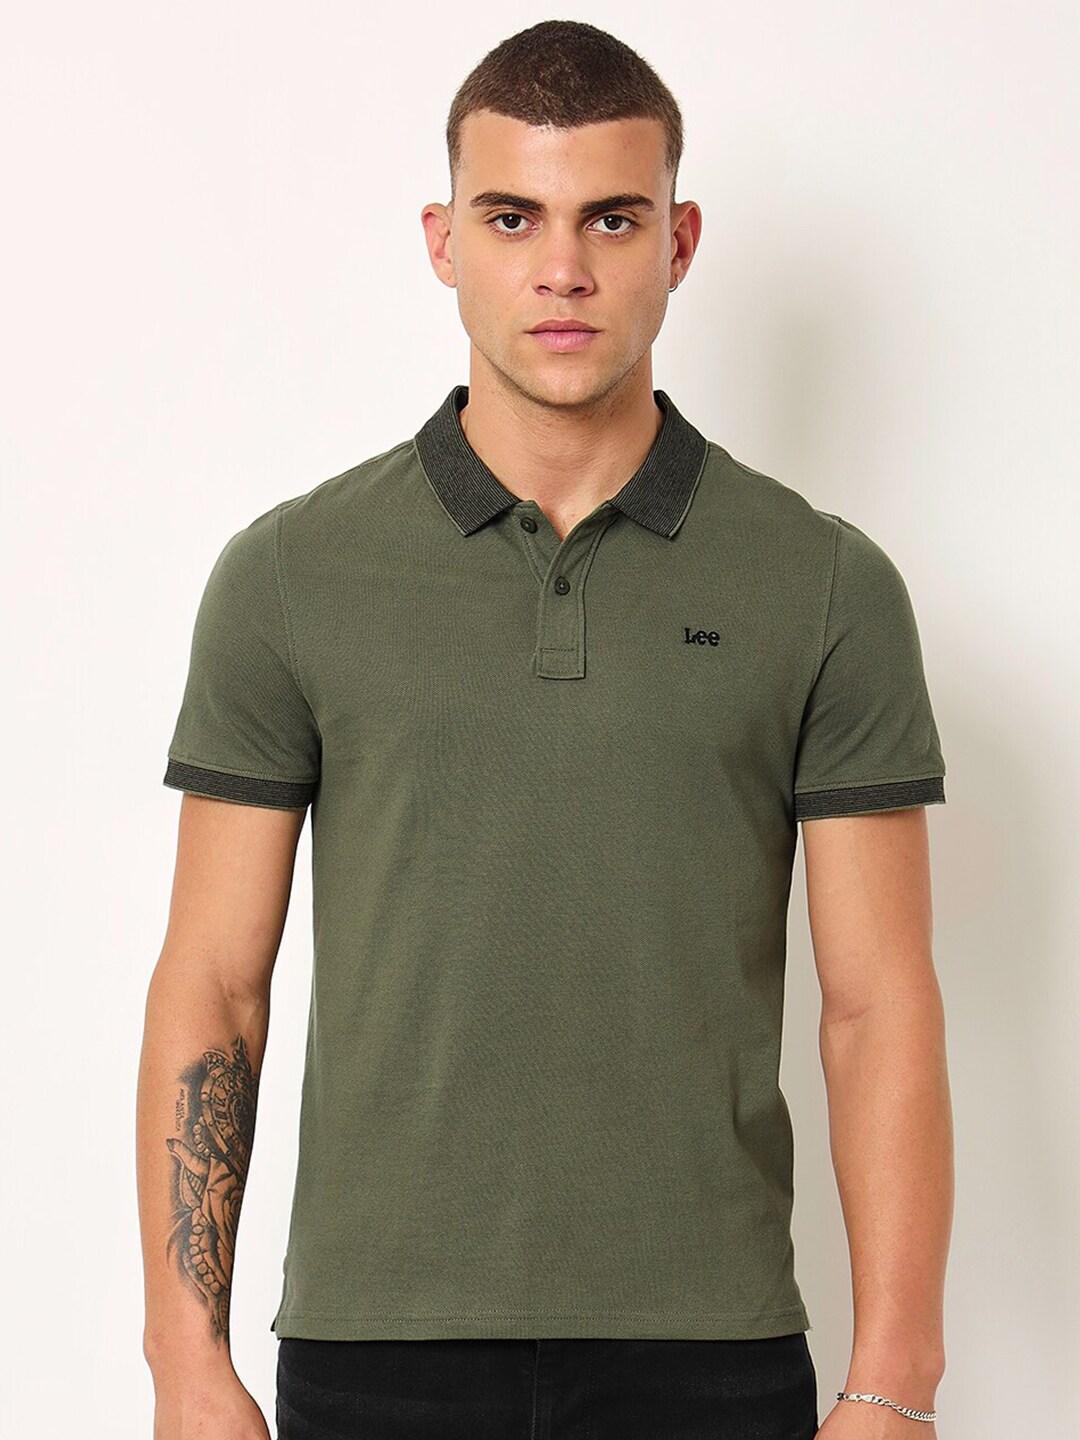 Lee Polo Collar Pure Cotton Slim Fit T-shirt